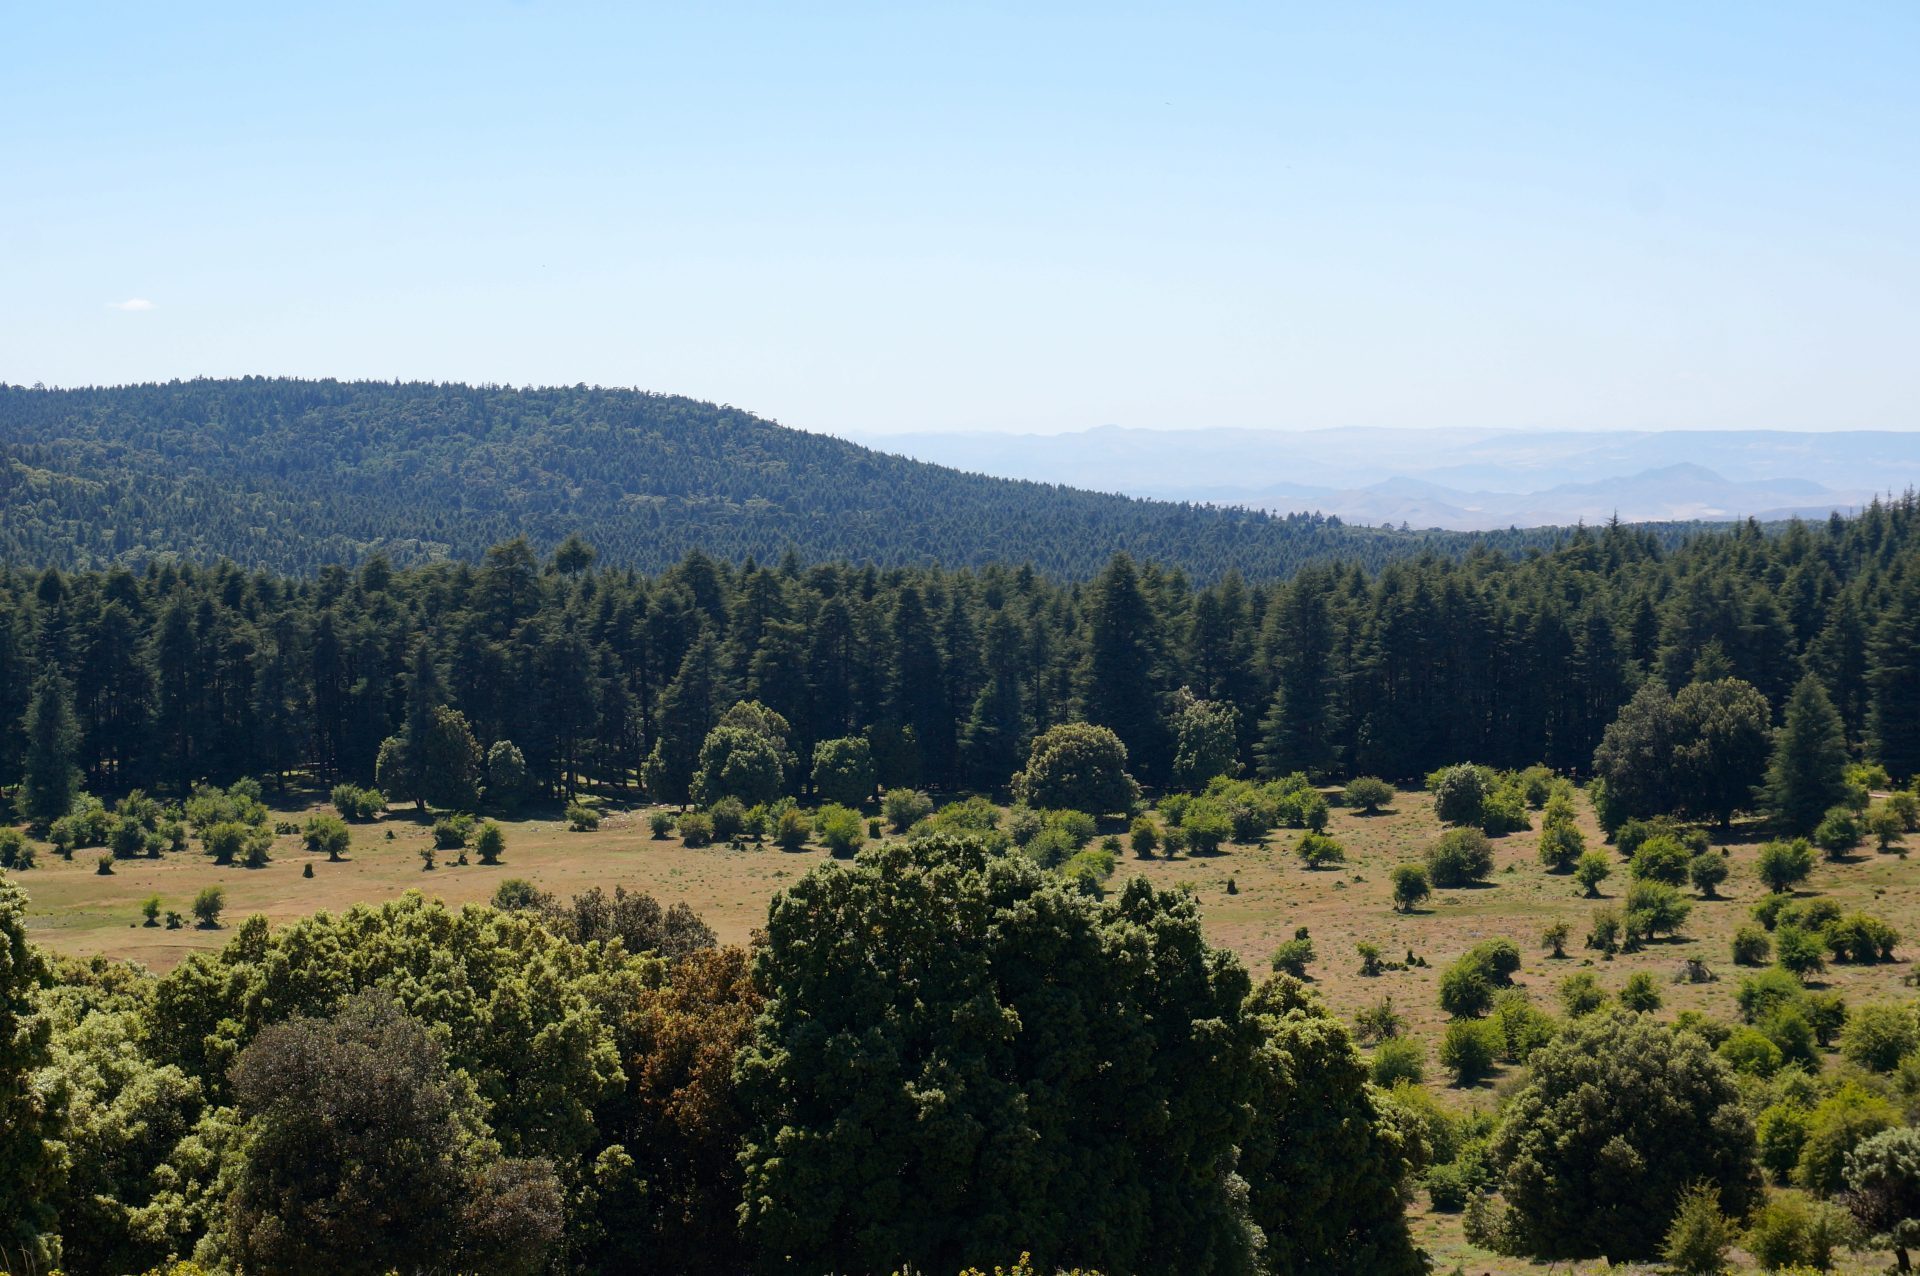 Morocco loses 17,000 hectares of forests annually- report